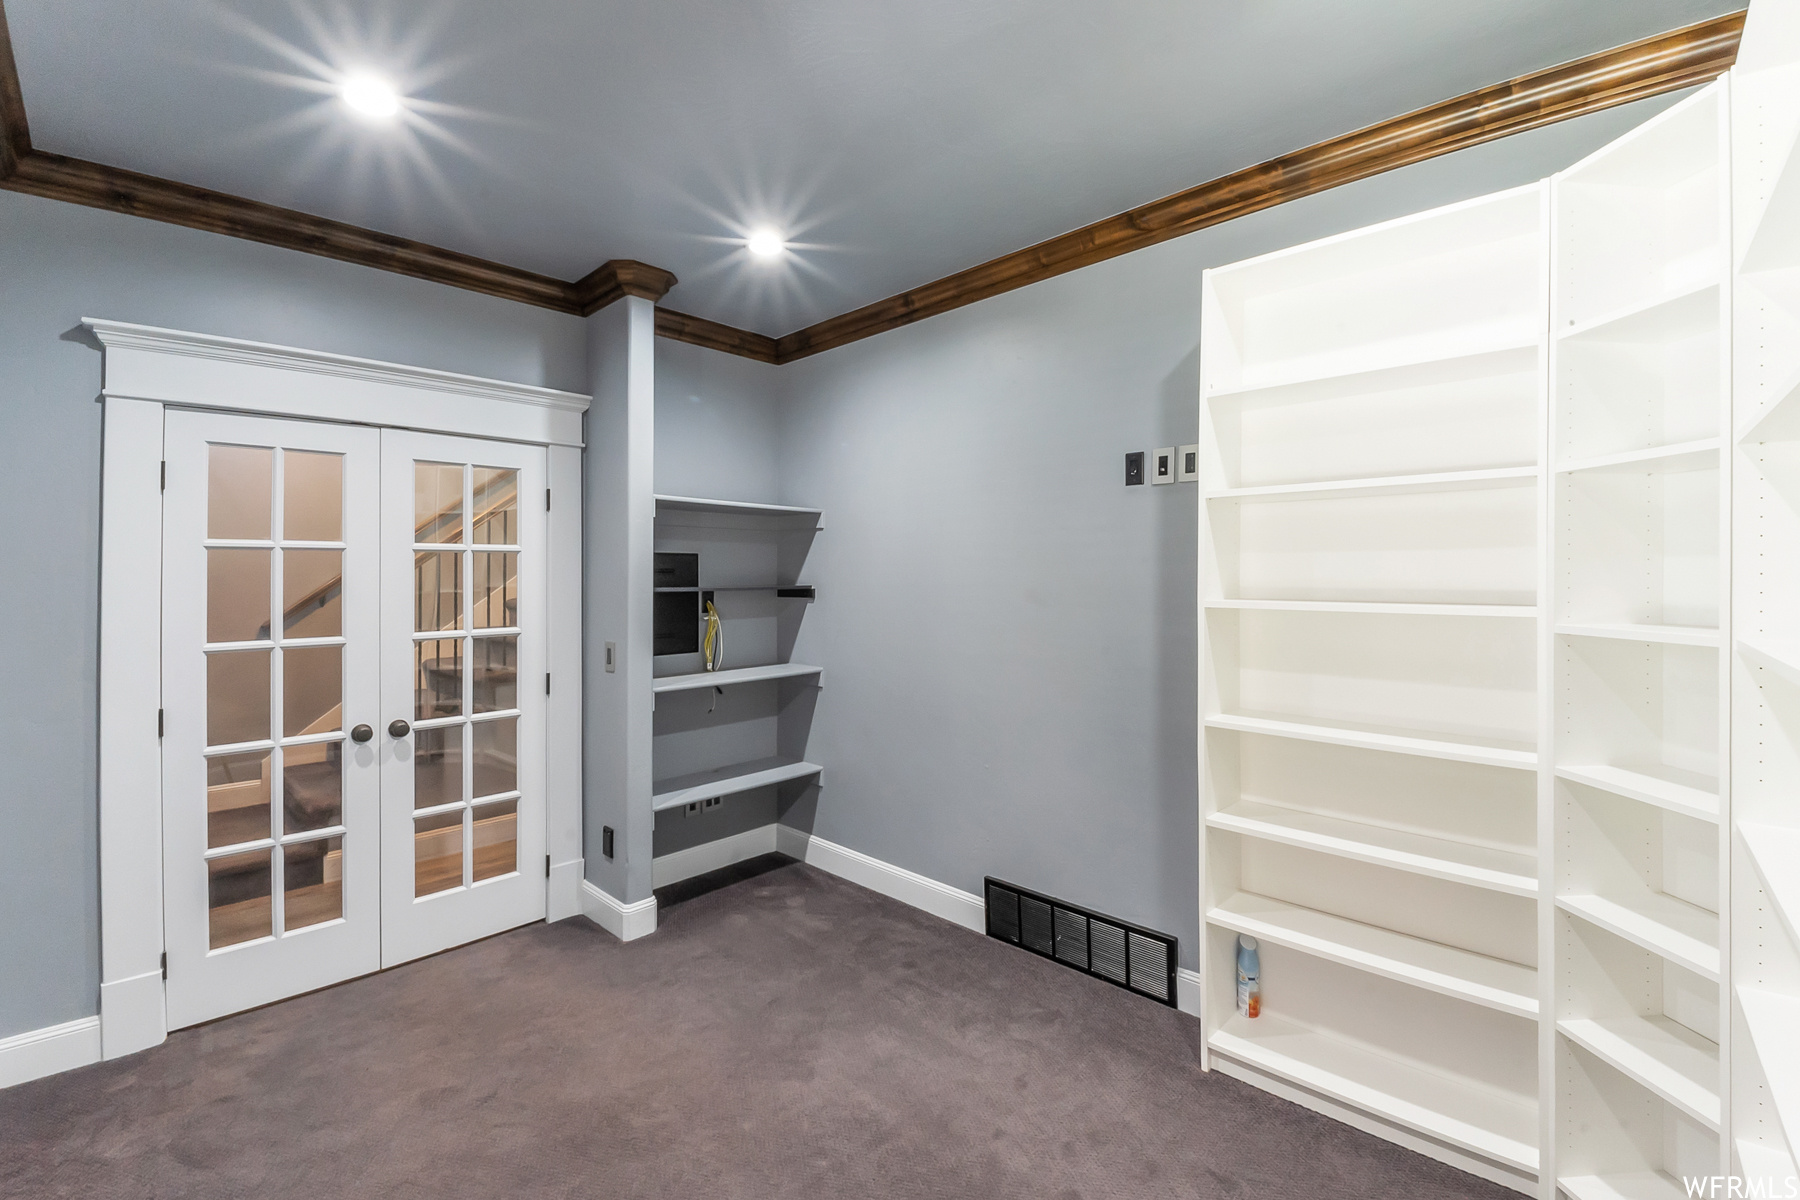 Office with custom built in bookshelves and french doors.